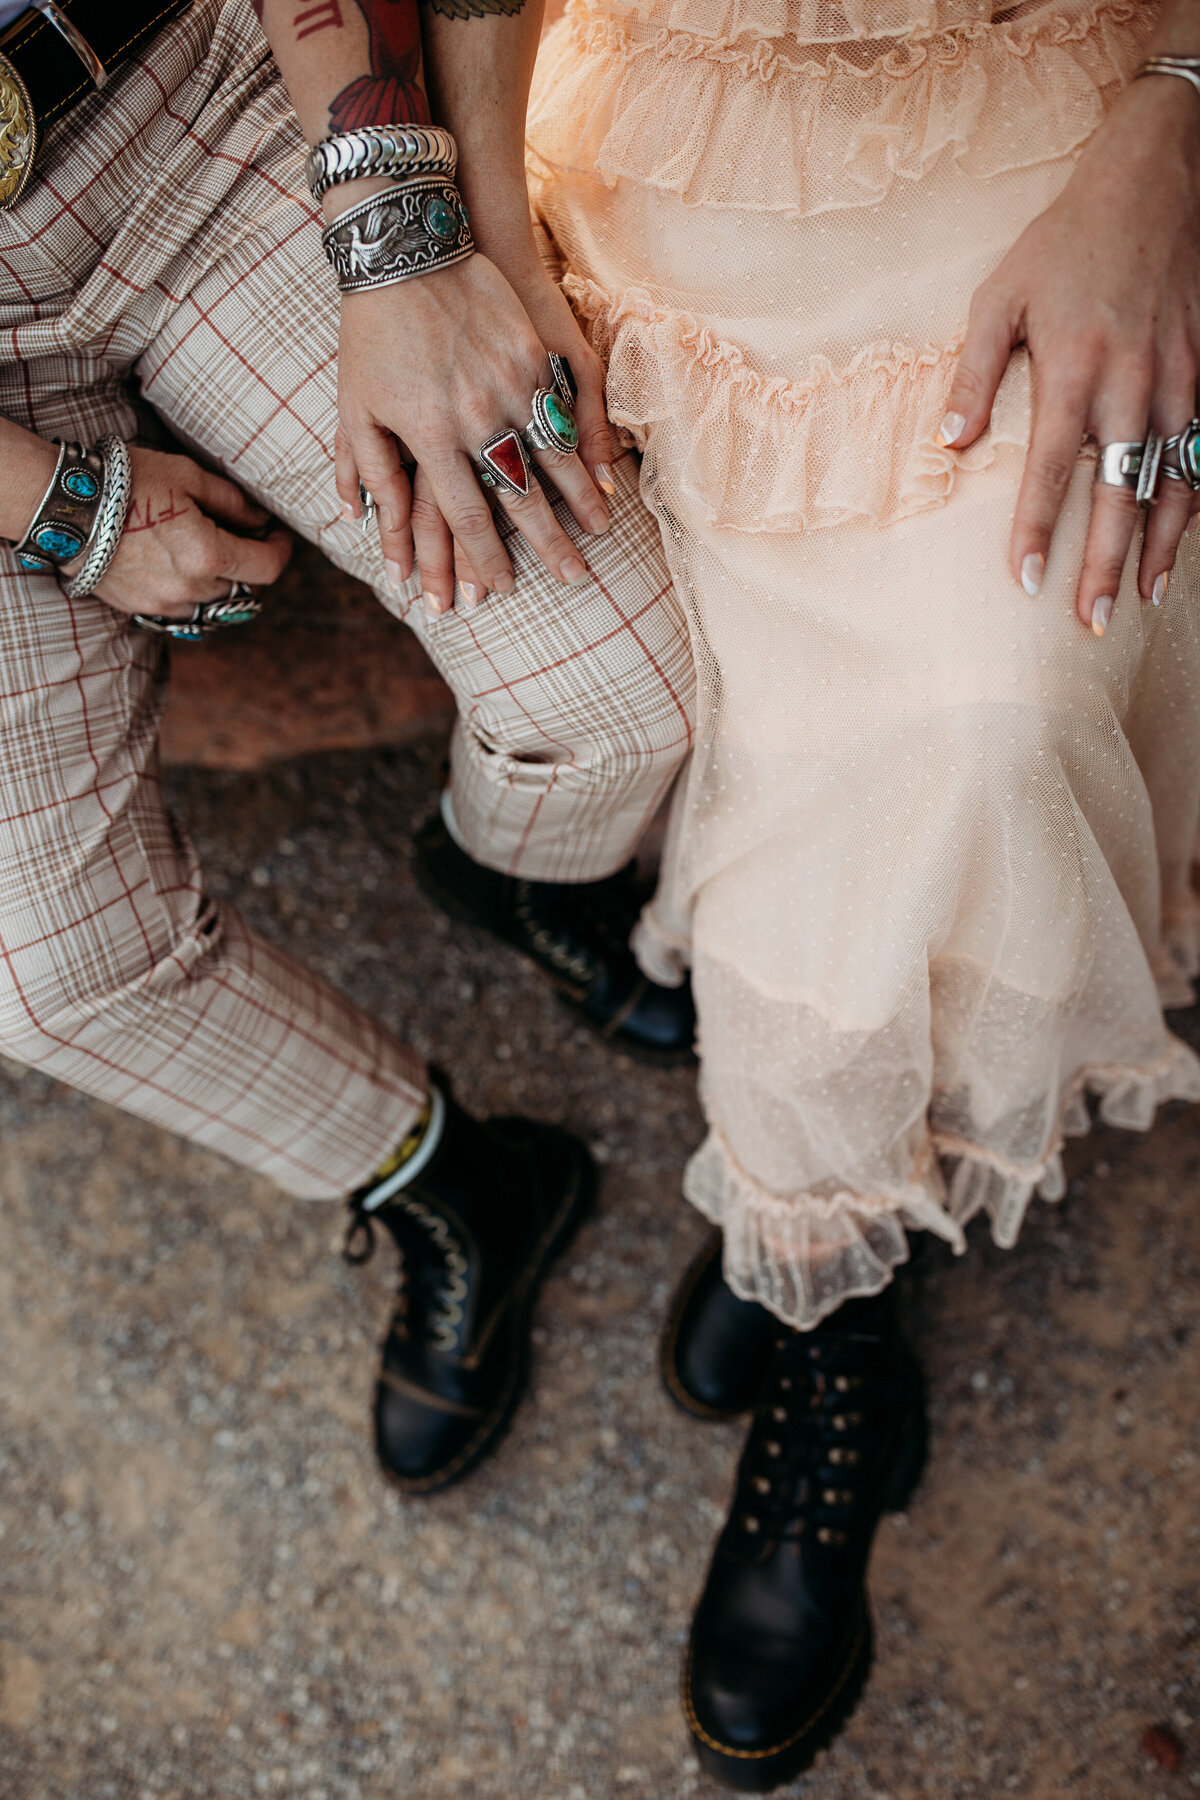 Detail shot of a couple's edgy wedding outfit, featuring leather boots and lace dress hem, with hands adorned in silver jewelry